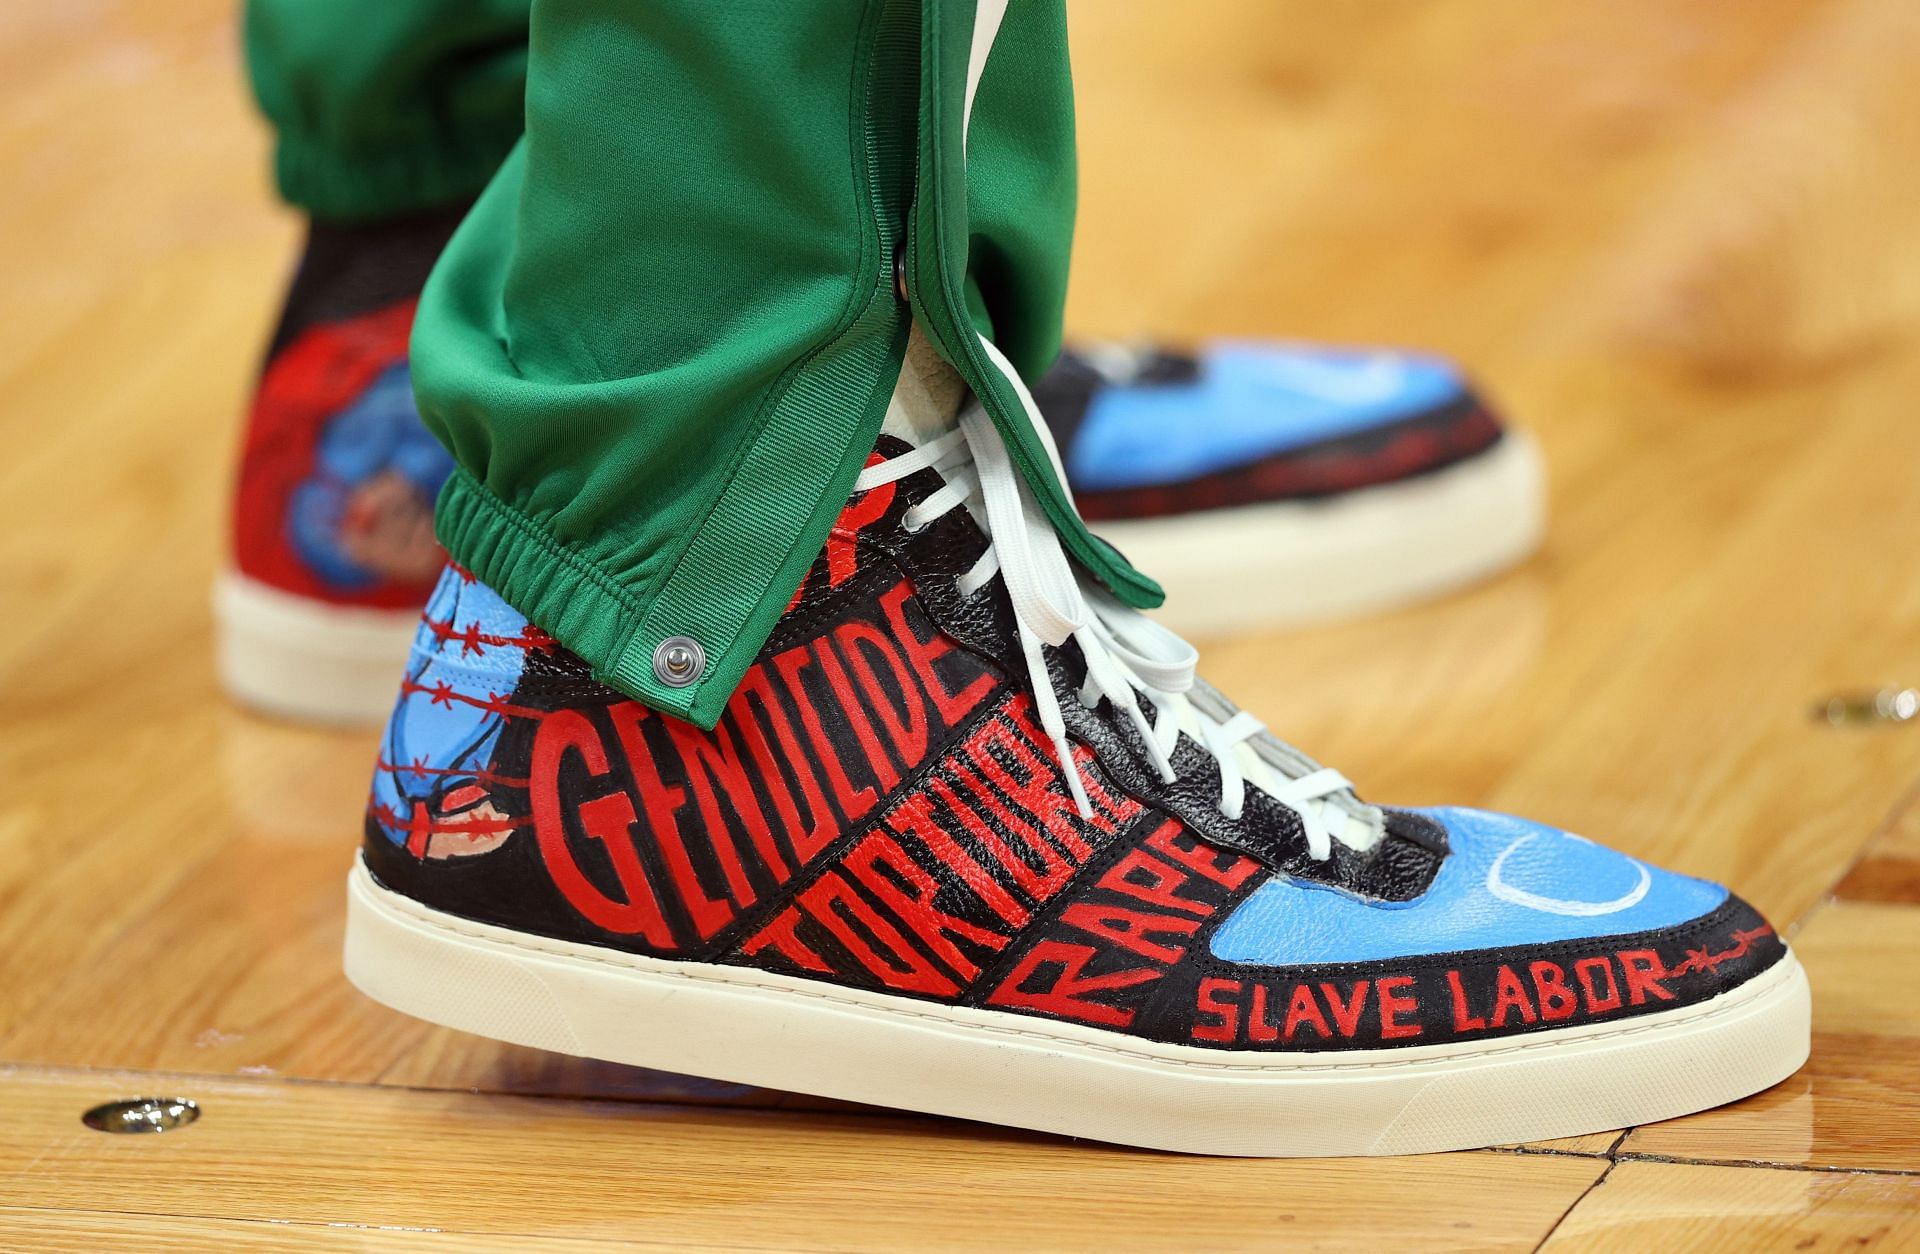 Enes Kanter of the Boston Celtics displays strong messages on his sneakers